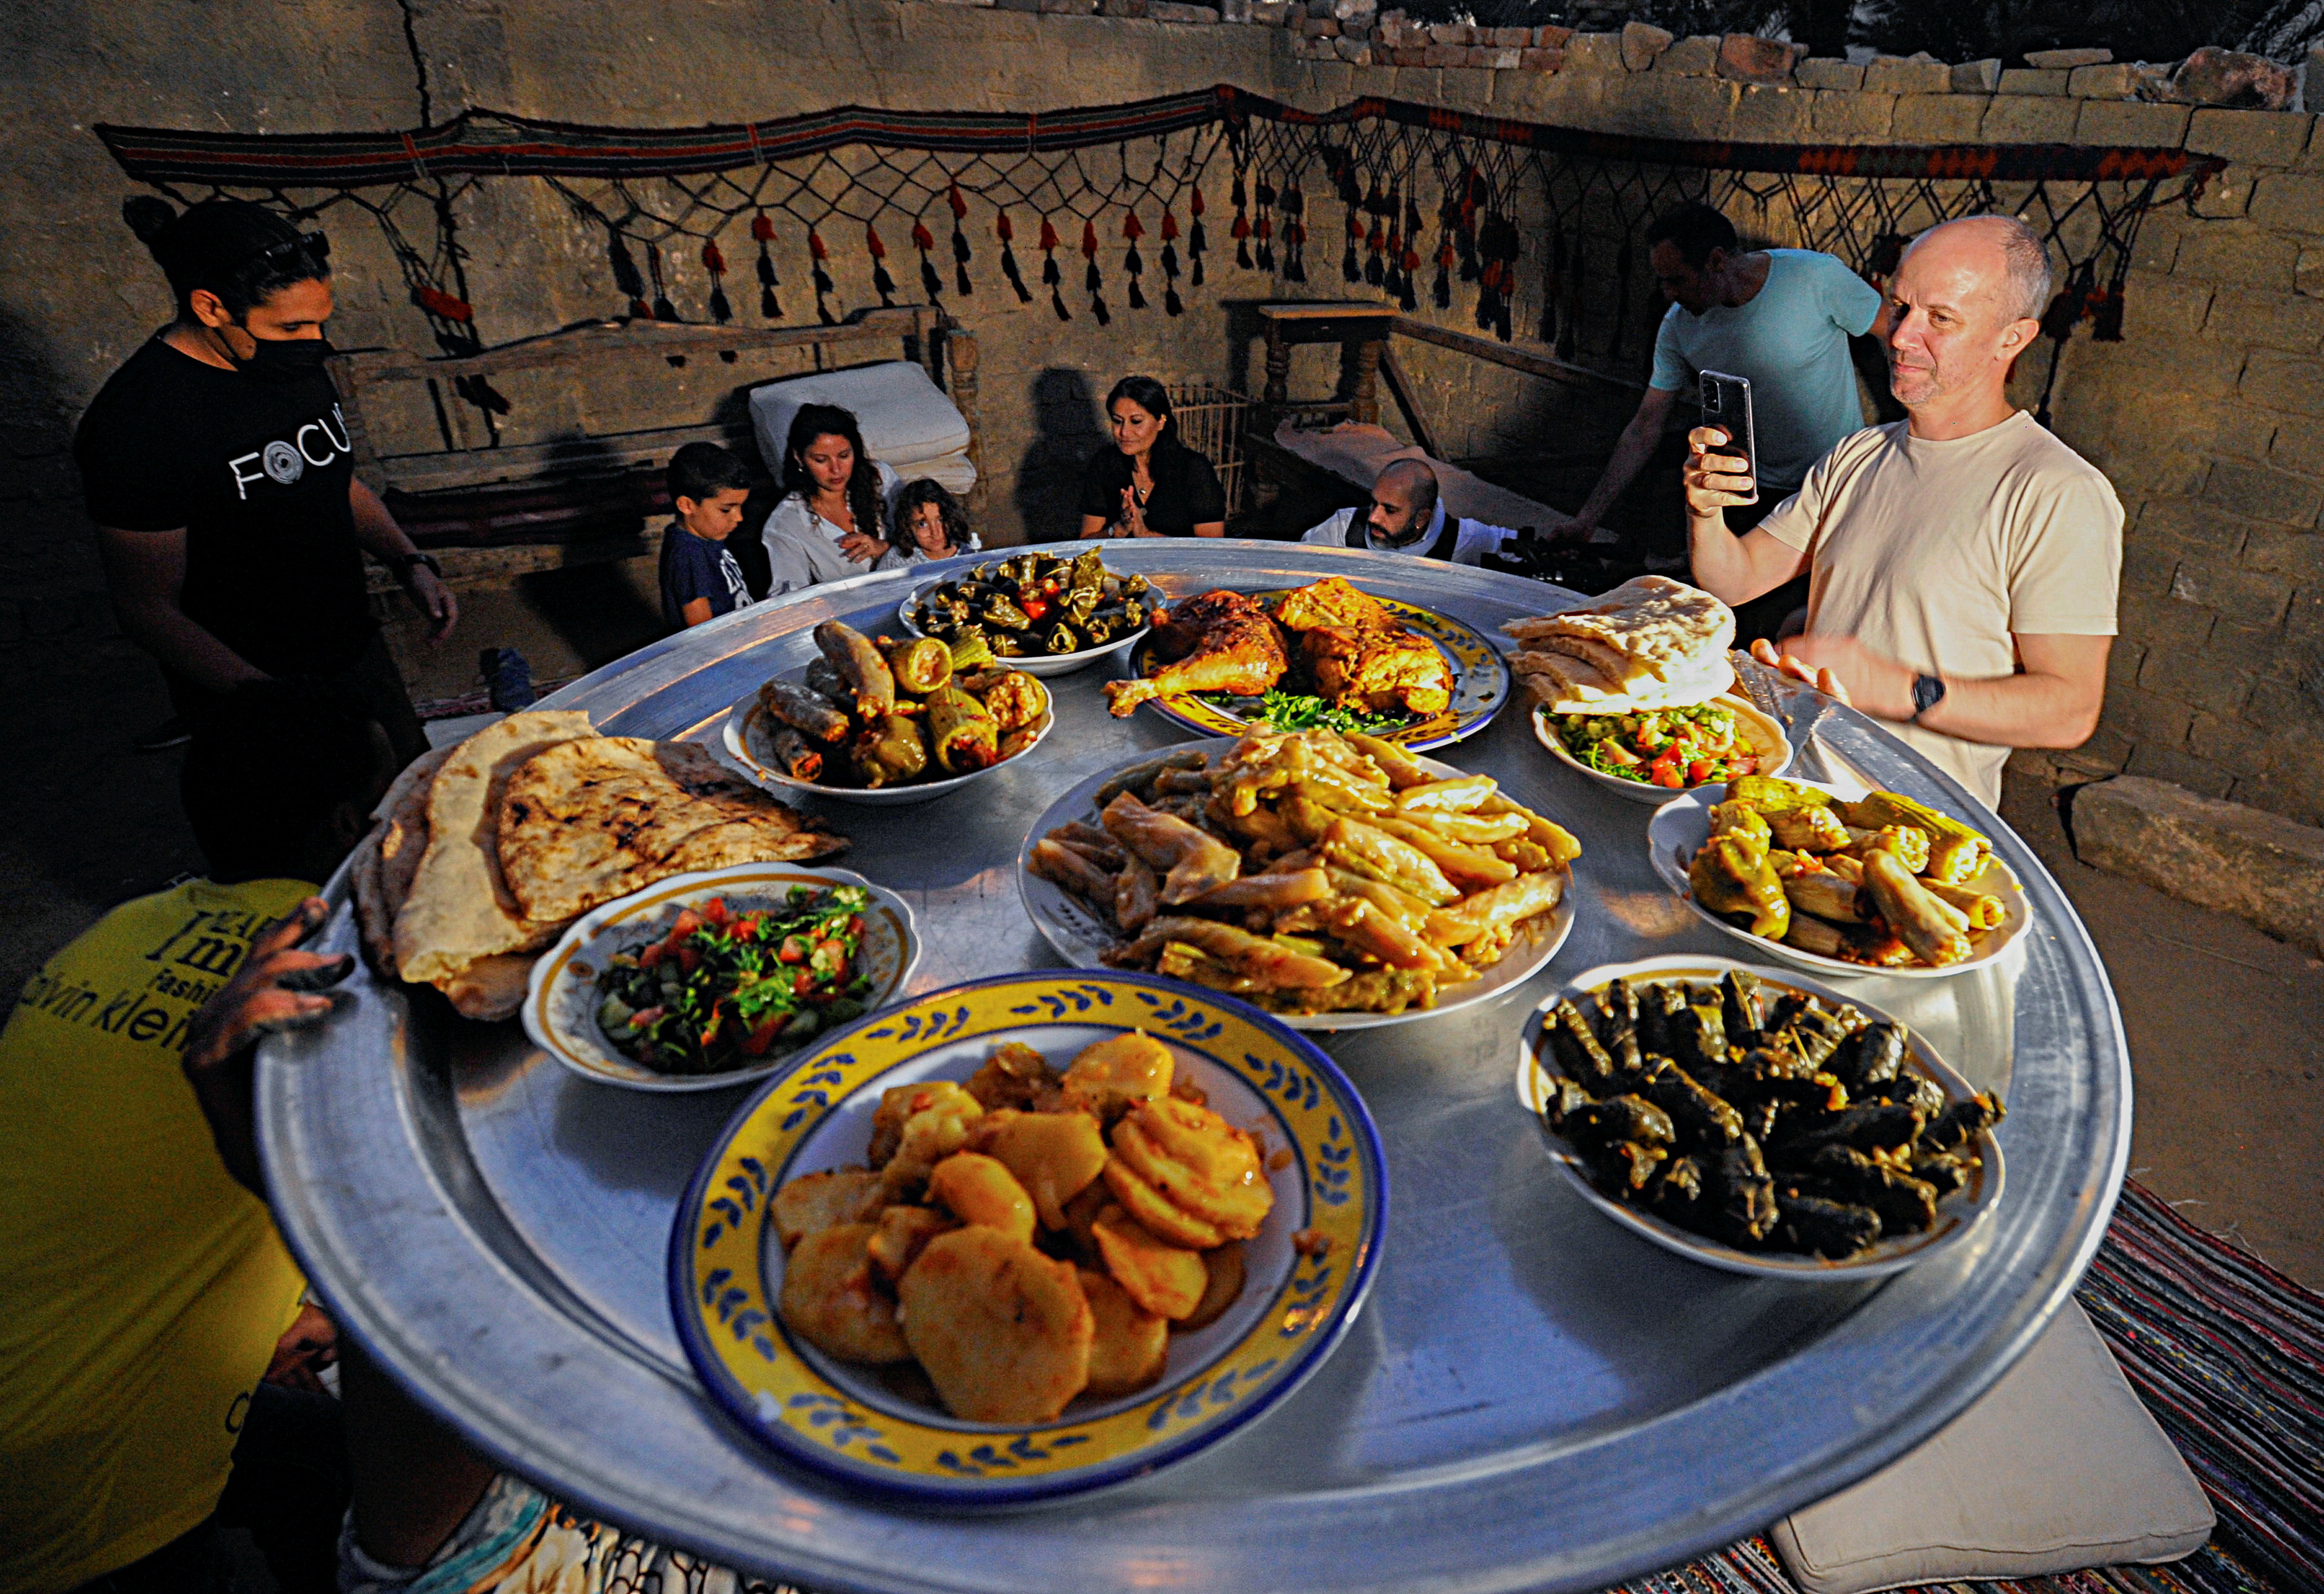 Tourists are seen next to a meal made by Saqqara residents, who sell food to improve their living conditions in thier village